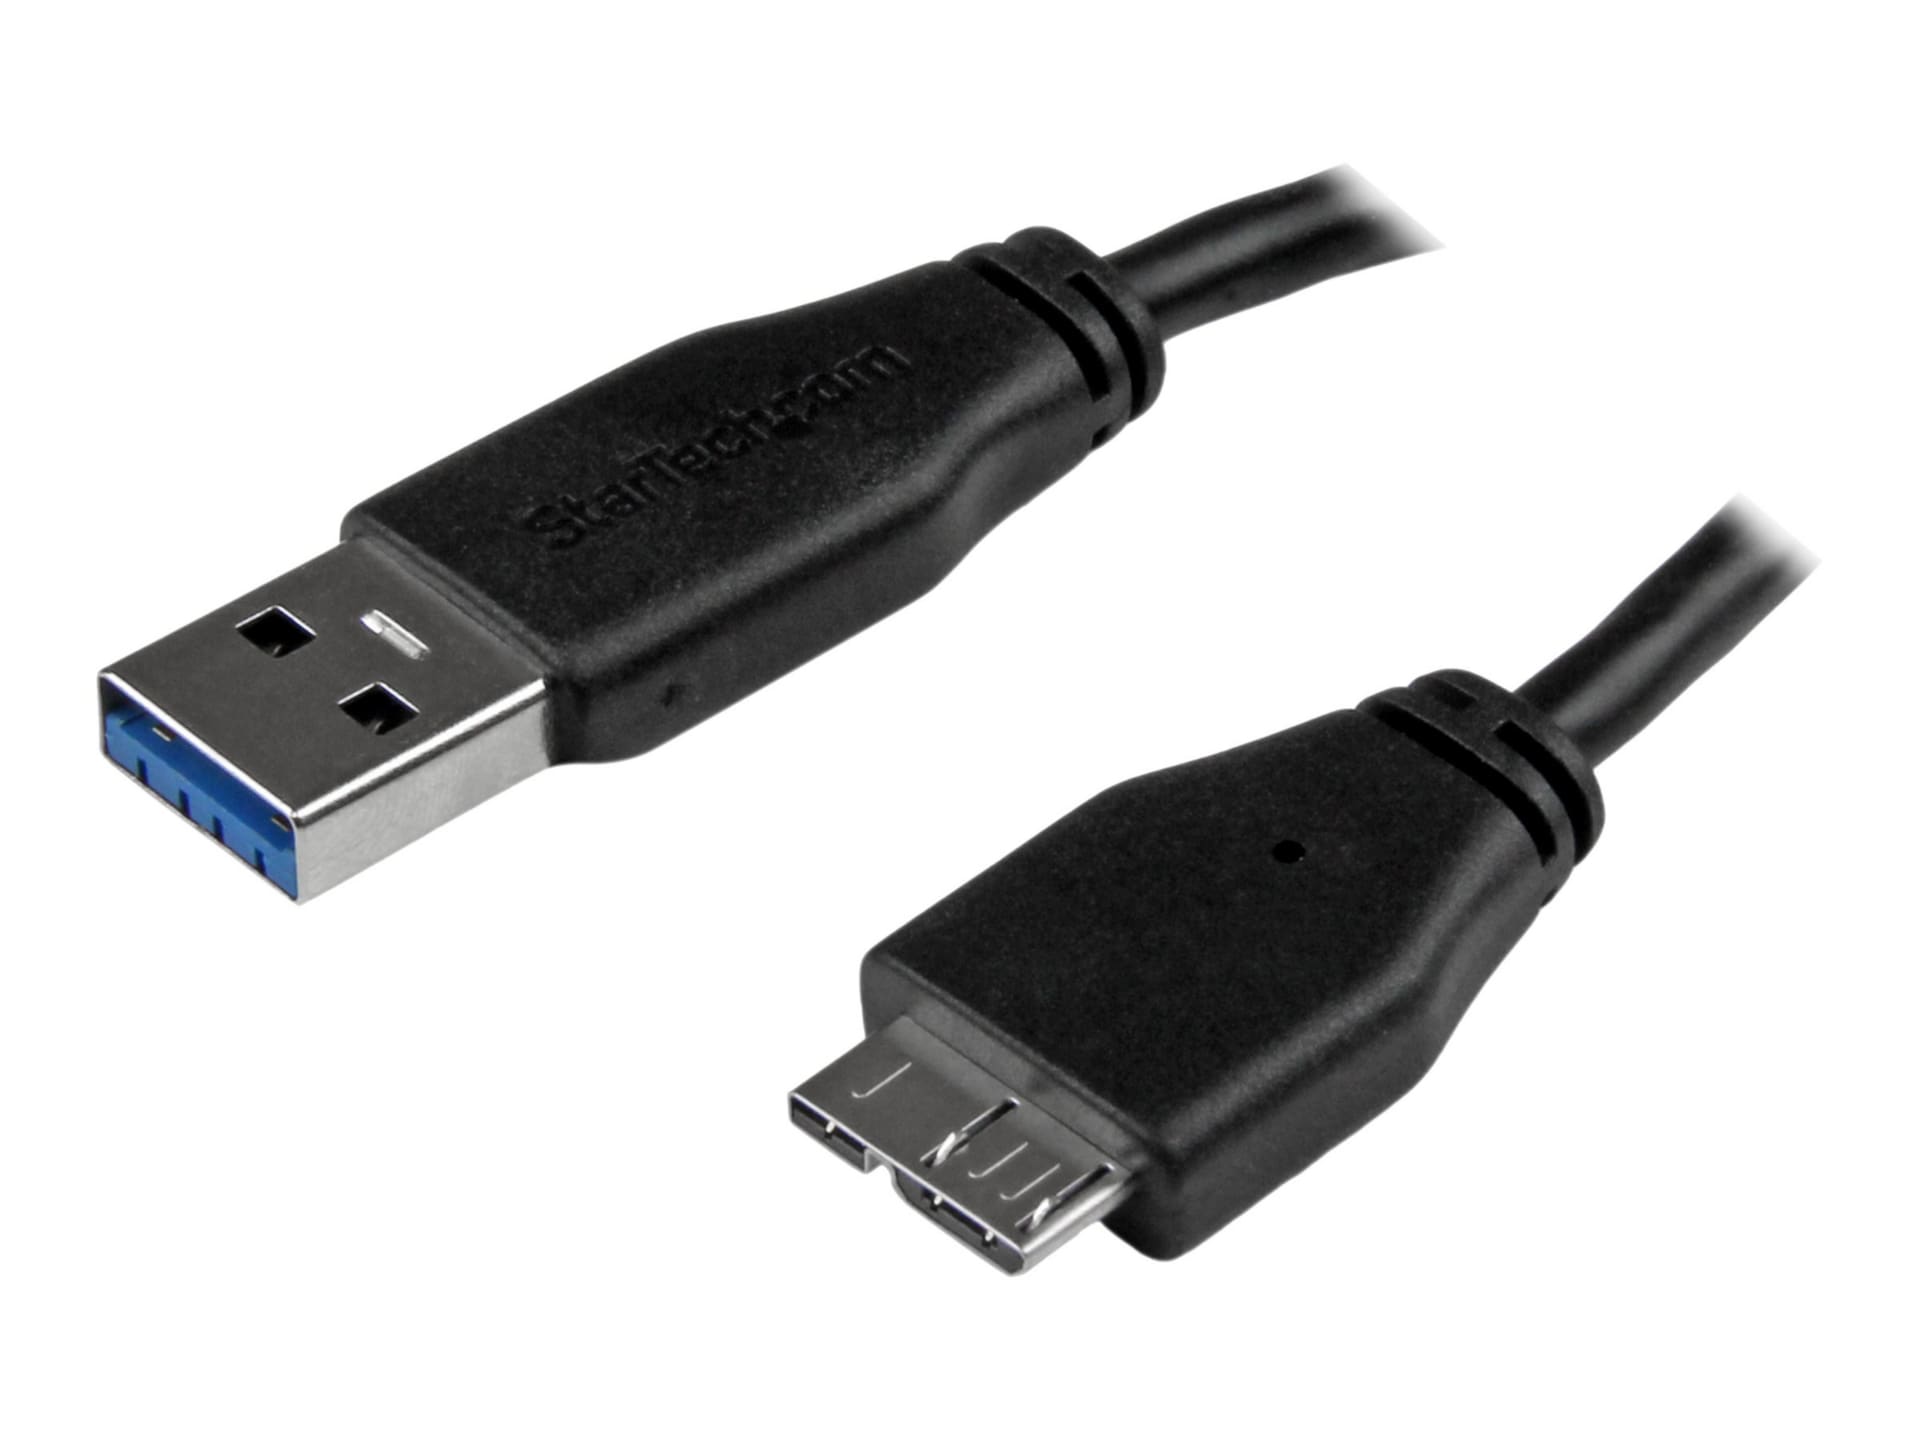 StarTech.com Slim SuperSpeed USB 3.0 A to Micro B Cable - M/M